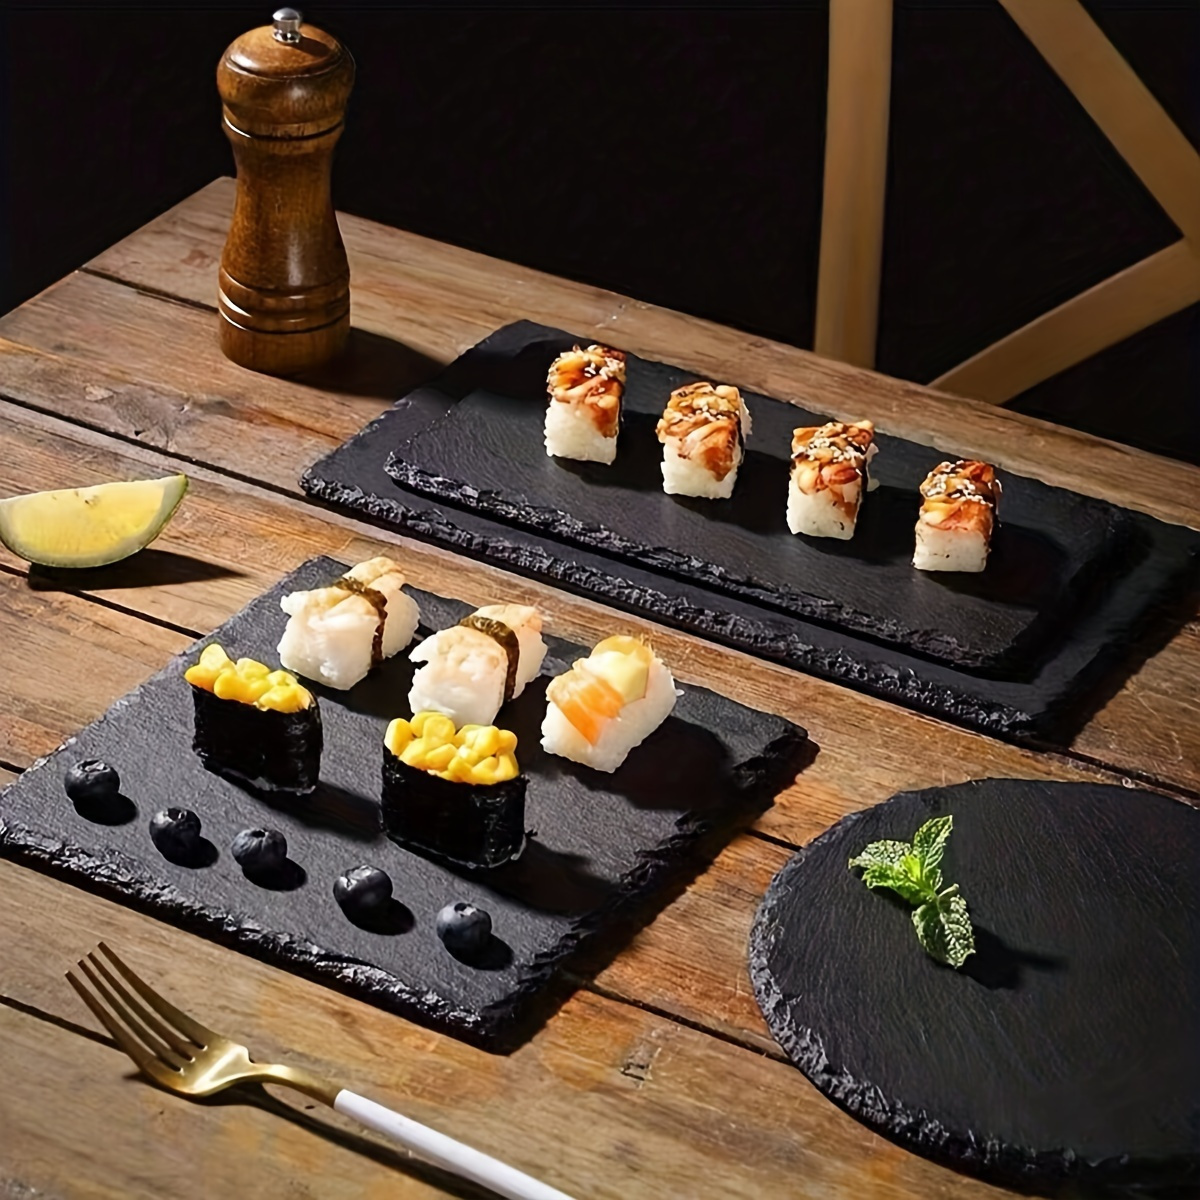 

Japanese Style Natural Slate Square Plate For Sushi & Steak - Black Marble Creative Serving Dish For Bbq, Western Cuisine - Ideal For Home Kitchen & Restaurant Use - 1pc